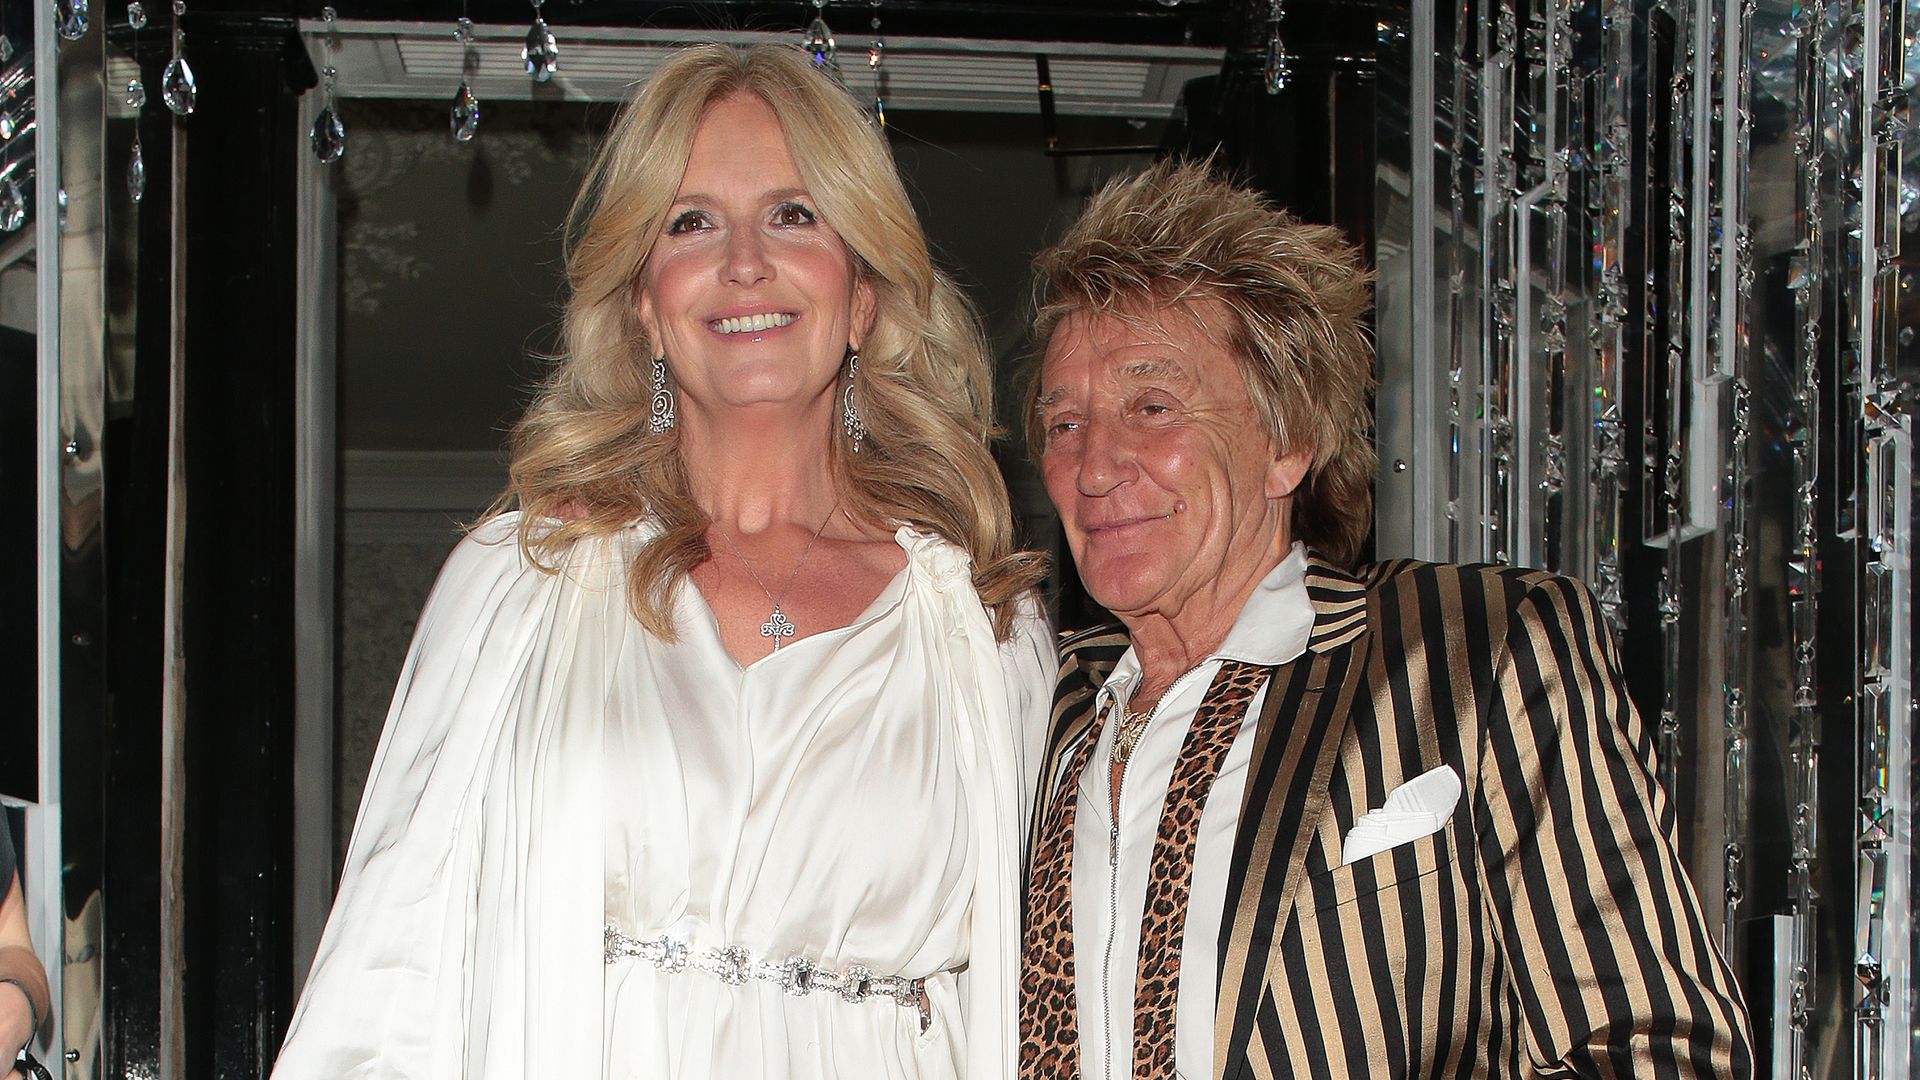 Penny Lancaster in white mini dress with Rod Stewart in a golden-striped suit